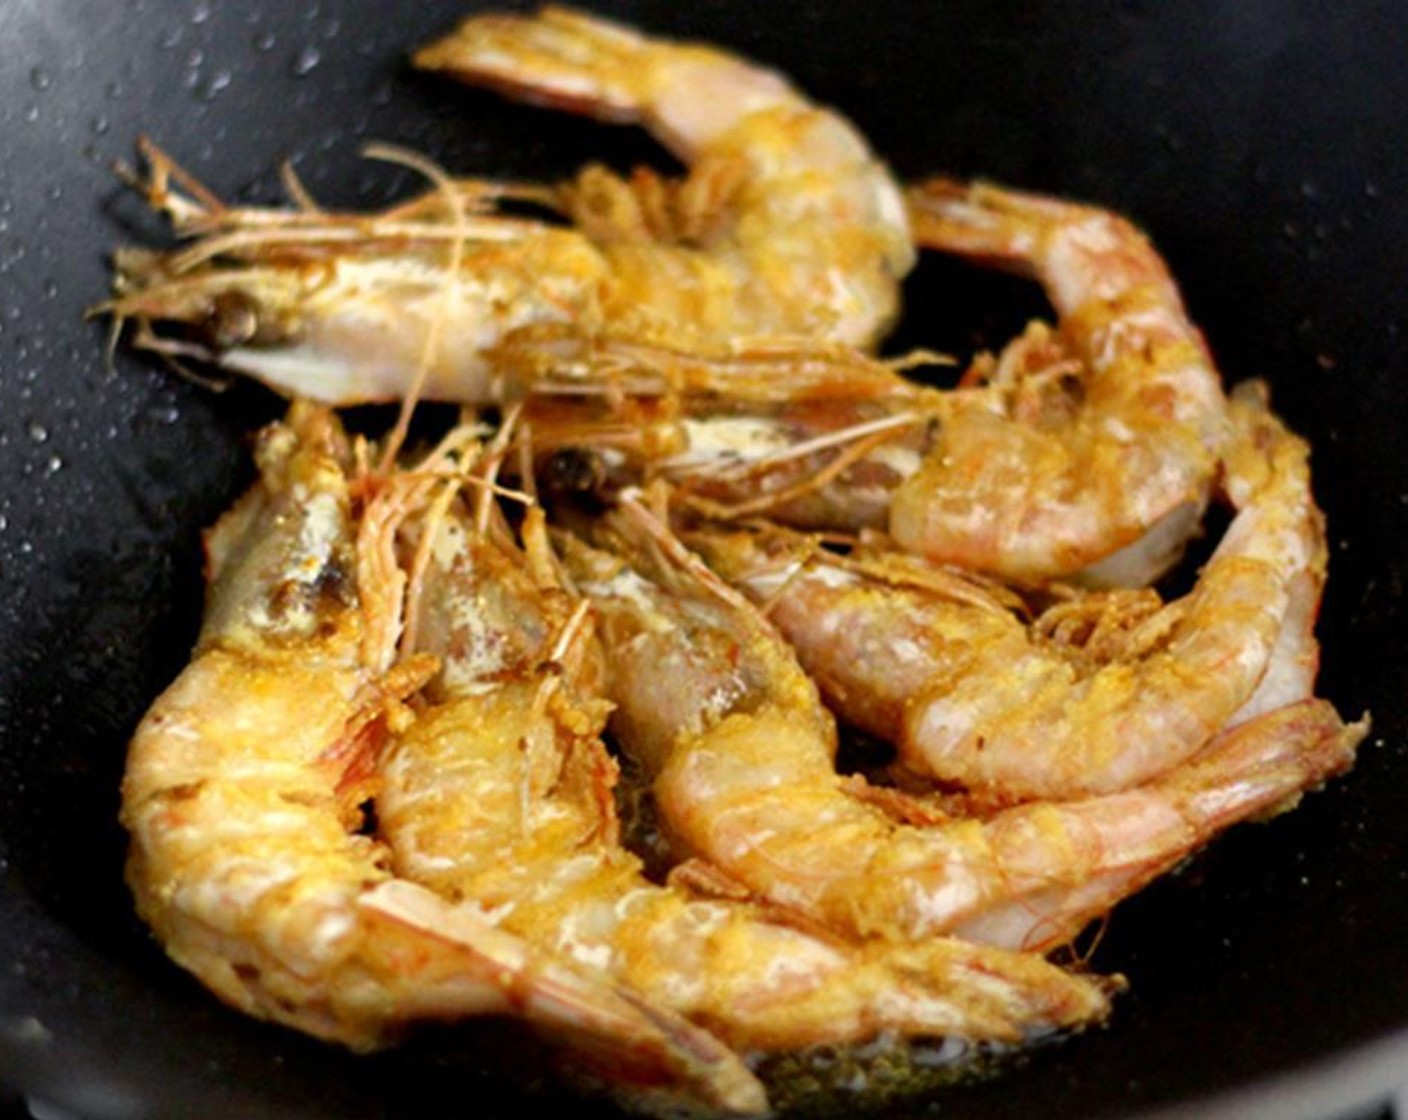 step 9 Heat up 3 tablespoons of garlic oil in a wok or deep skillet on high heat until smoking. Lay the shrimps flat on one side in the wok/skillet to fry, then don’t move them. Once the first side is blistered and crispy, add the Dried Chili Peppers (6).